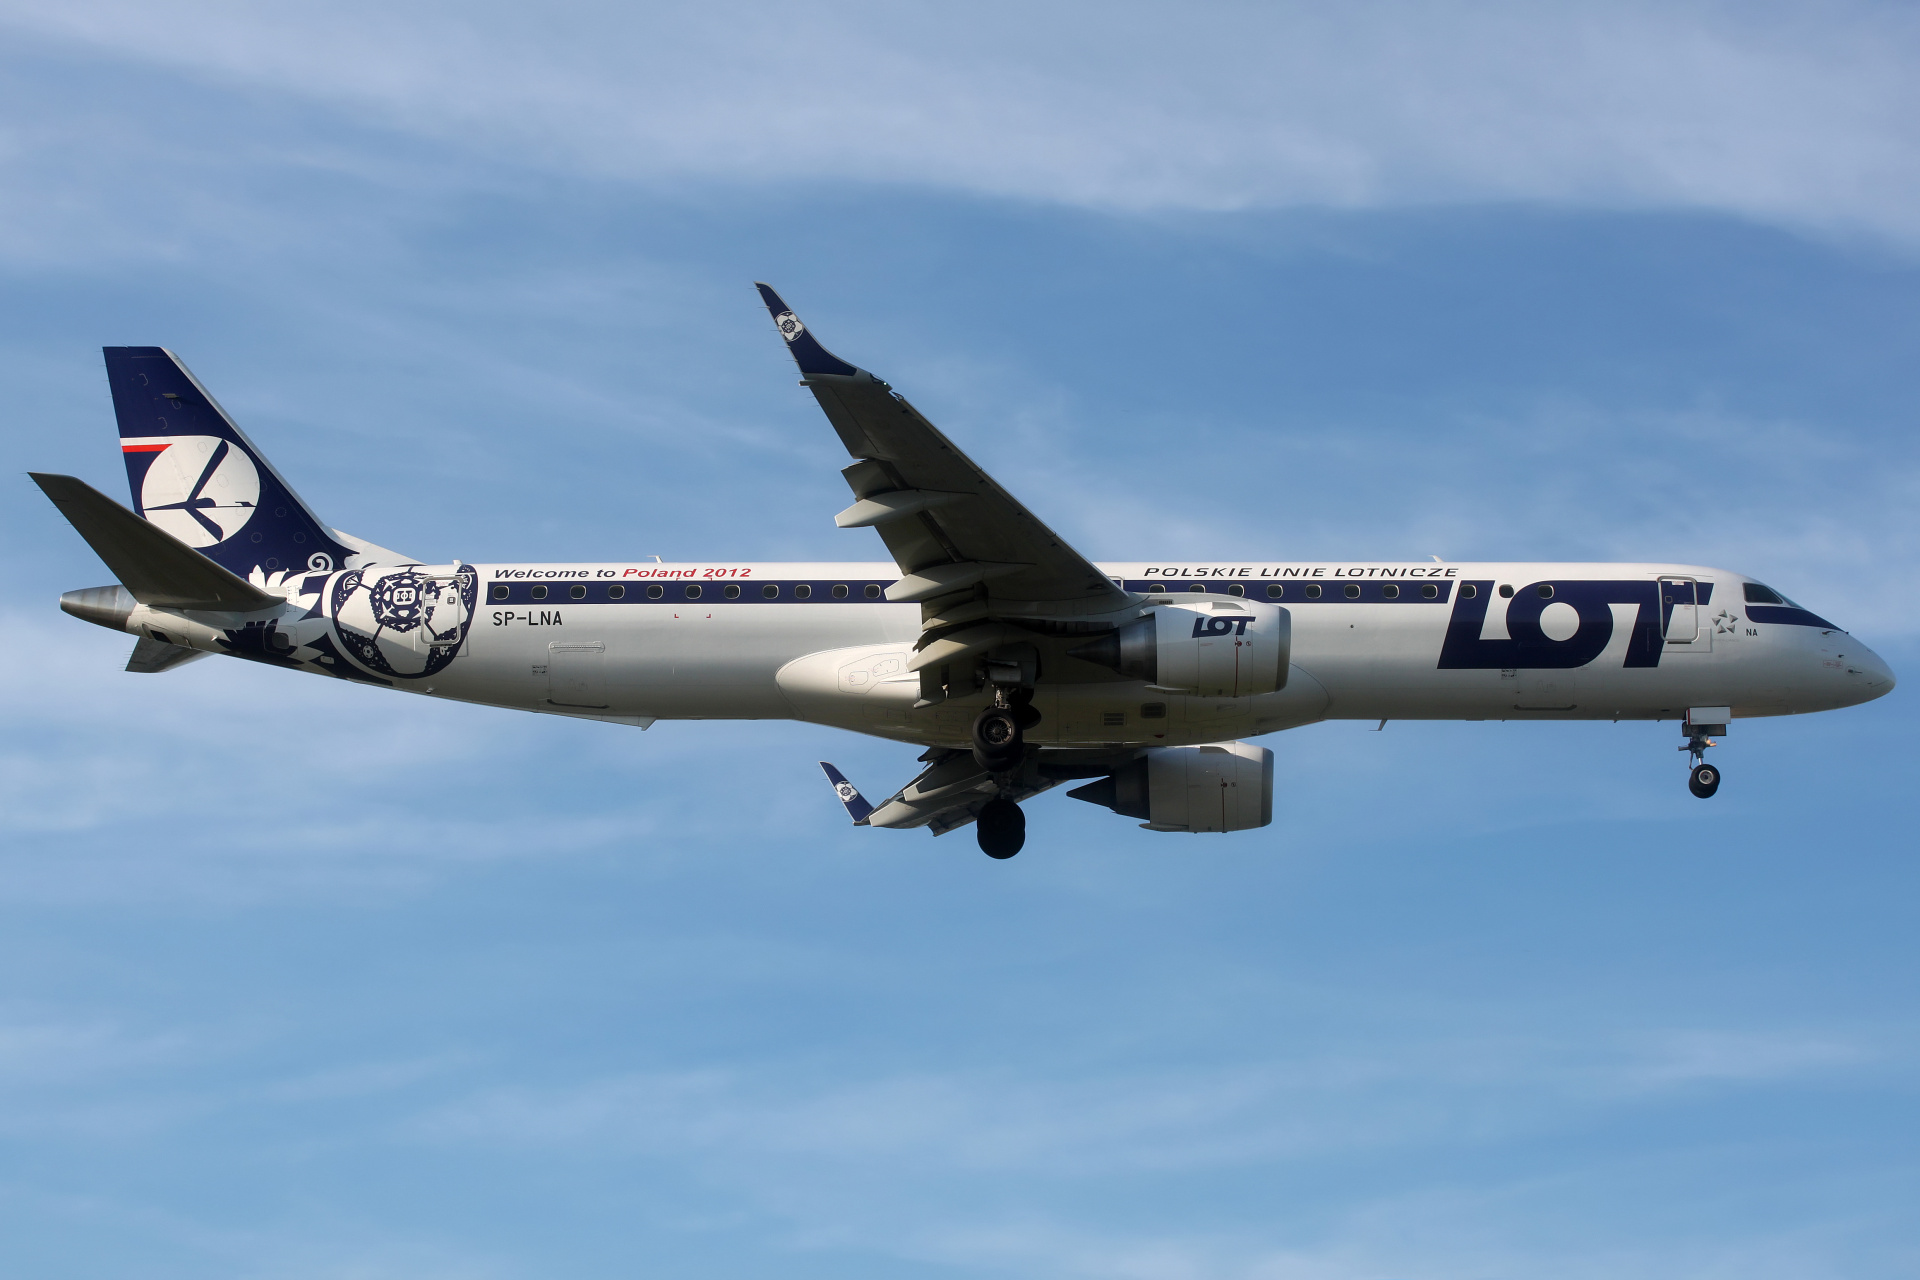 SP-LNA (Welcome to Poland 2012 livery) (Aircraft » EPWA Spotting » Embraer E195 » LOT Polish Airlines)